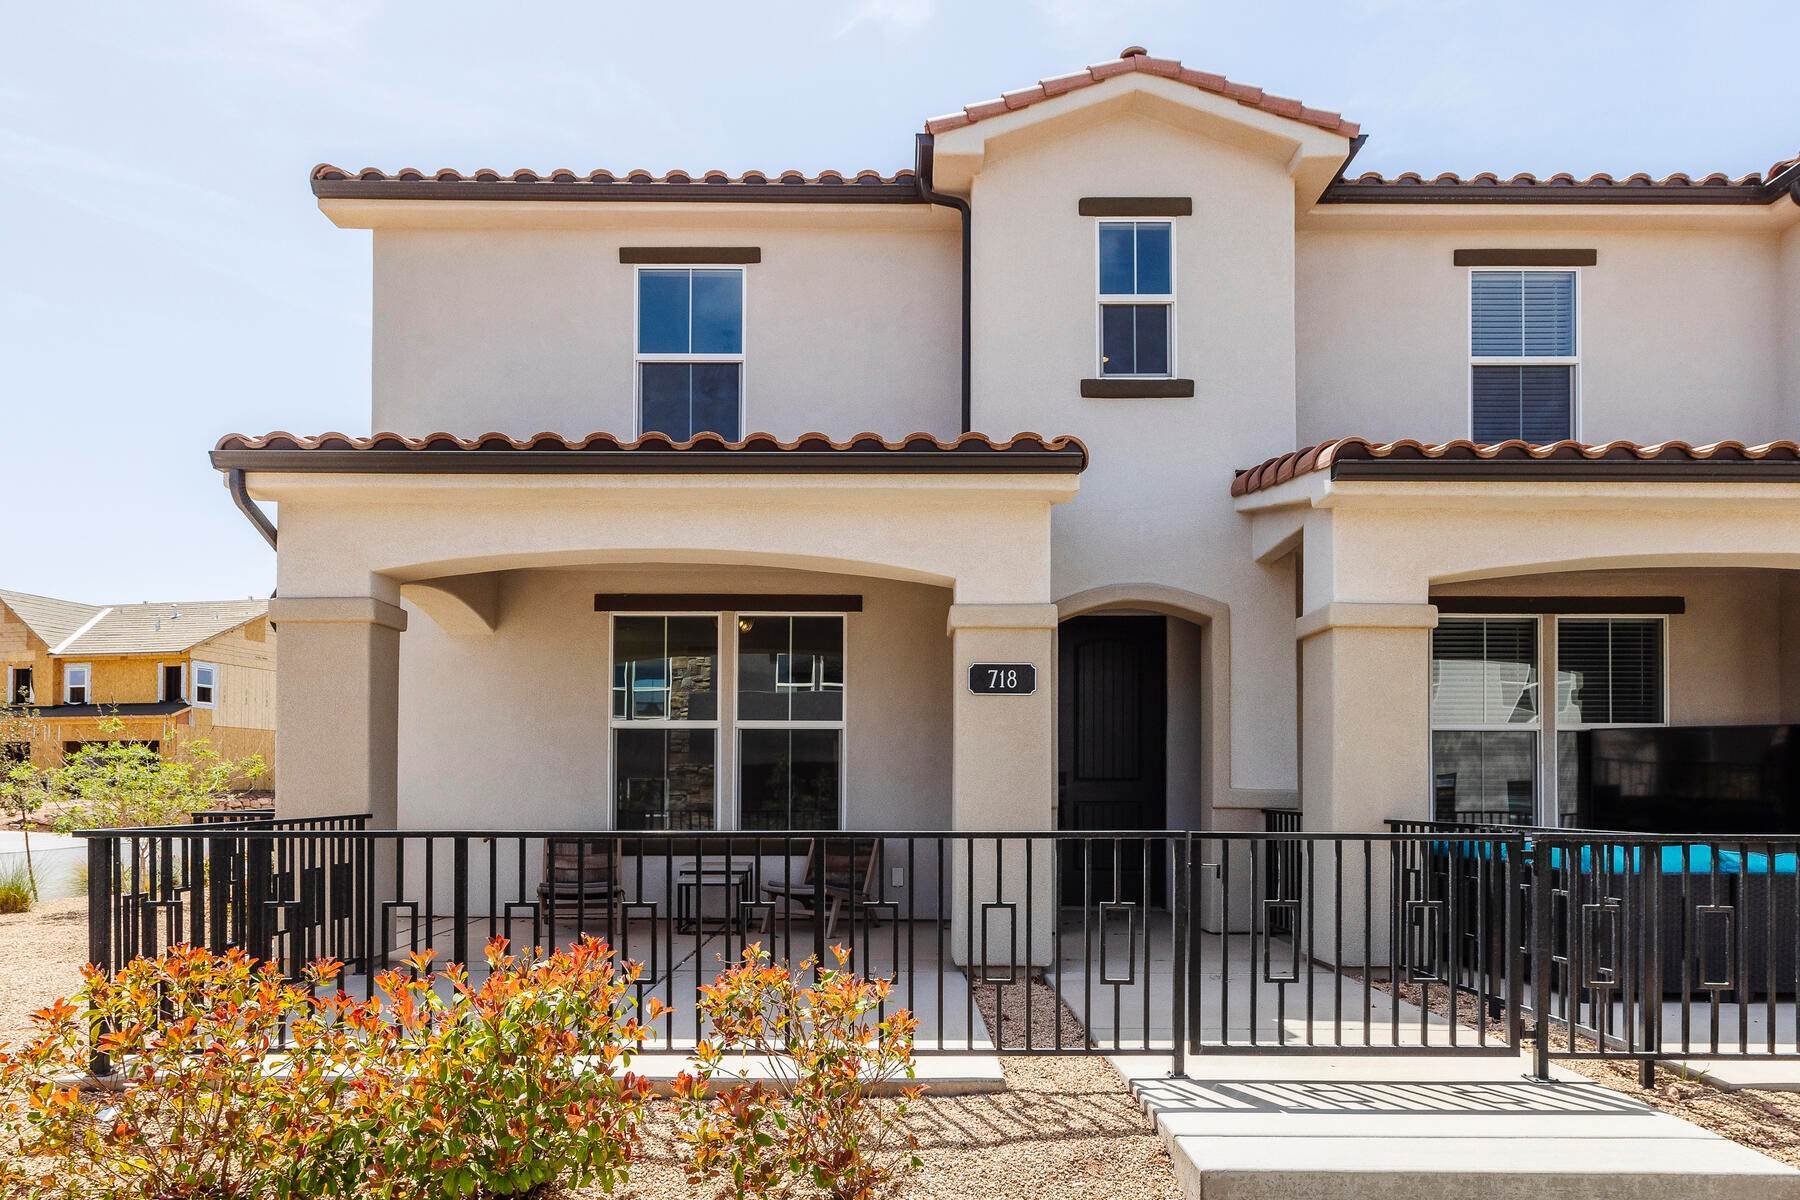 Townhouse for Sale at New Southwestern Contemporary Homes with Incredible Amenities in St. George Lot 23 Block 8, Desert Color St. George, Utah 84790 United States